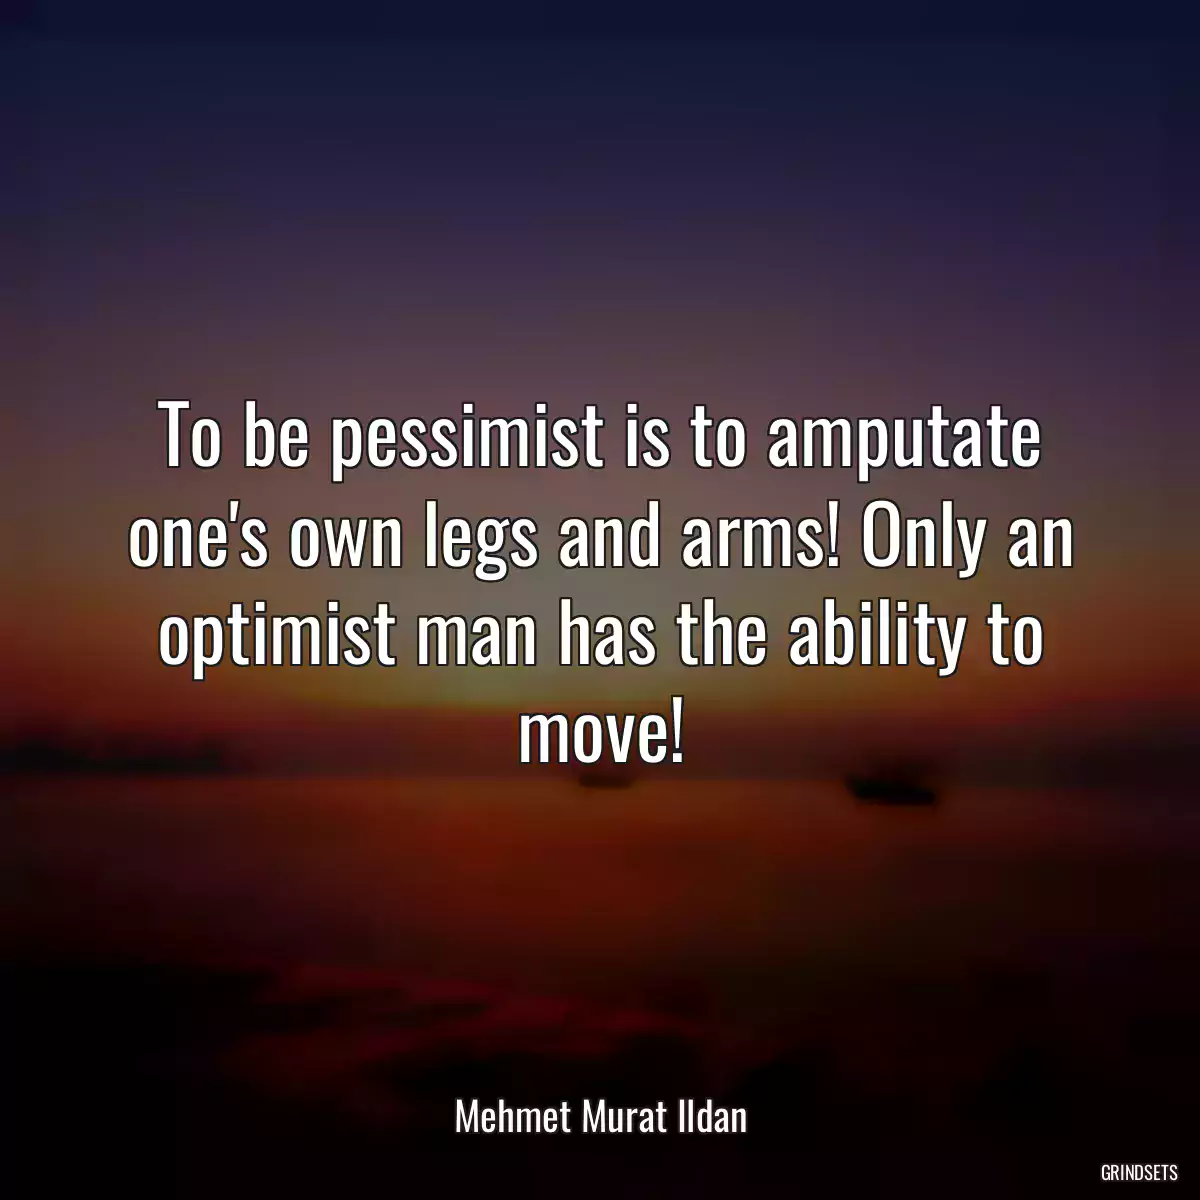 To be pessimist is to amputate one\'s own legs and arms! Only an optimist man has the ability to move!